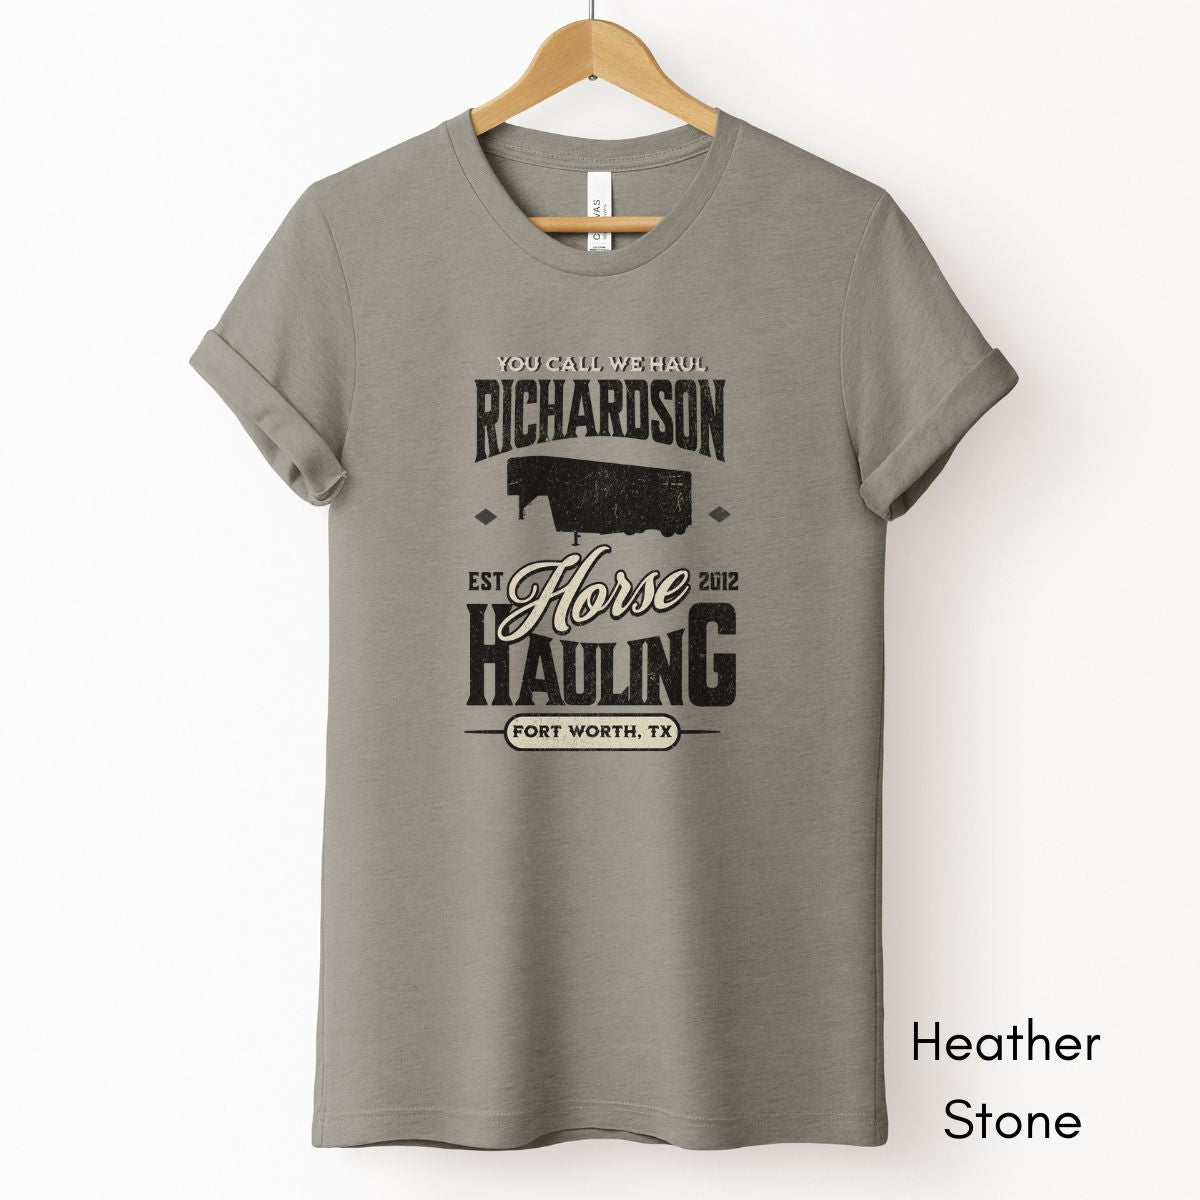 Custom Horse/Livestock Hauling tee | Local Equine Transport T-shirt | Personalized Tee | Gift for Horse Business Owner